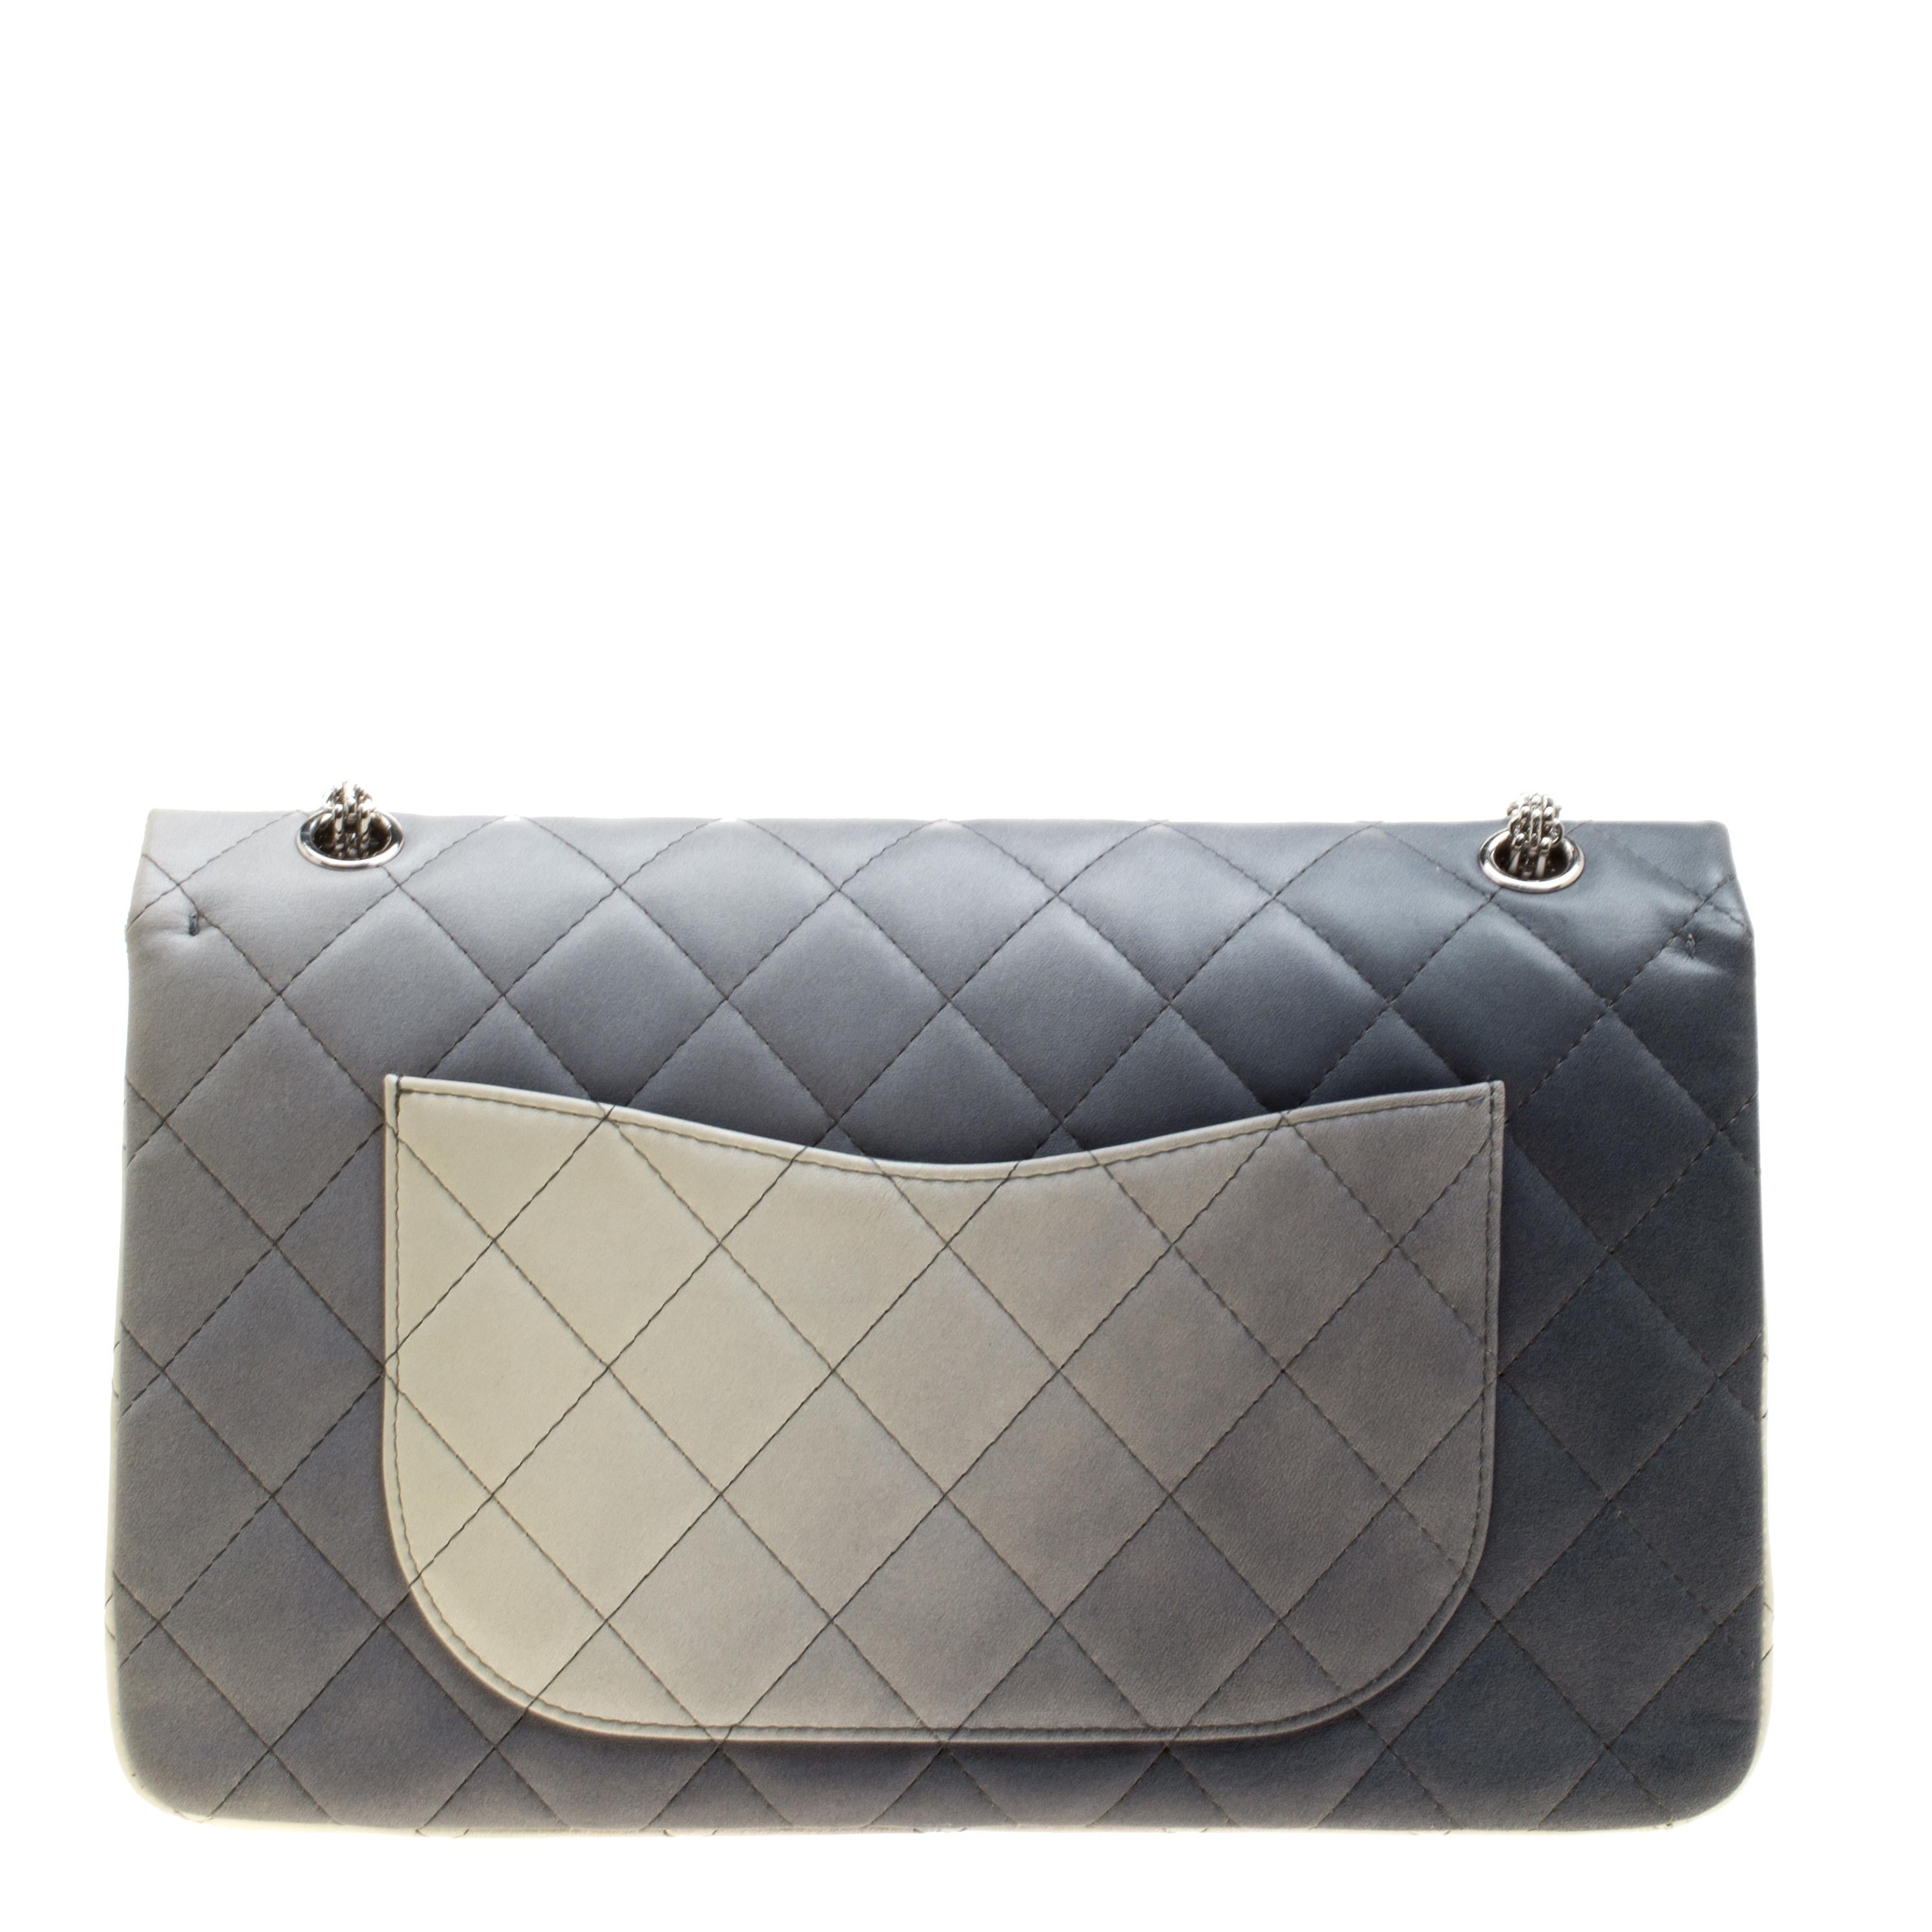 Chanel's Flap bags are iconic and monumental in the history of fashion. This Reissue 2.55 Classic 227 is a buy that is worth every bit of your splurge. Exquisitely crafted from multicolor leather, it bears their signature quilt pattern and the